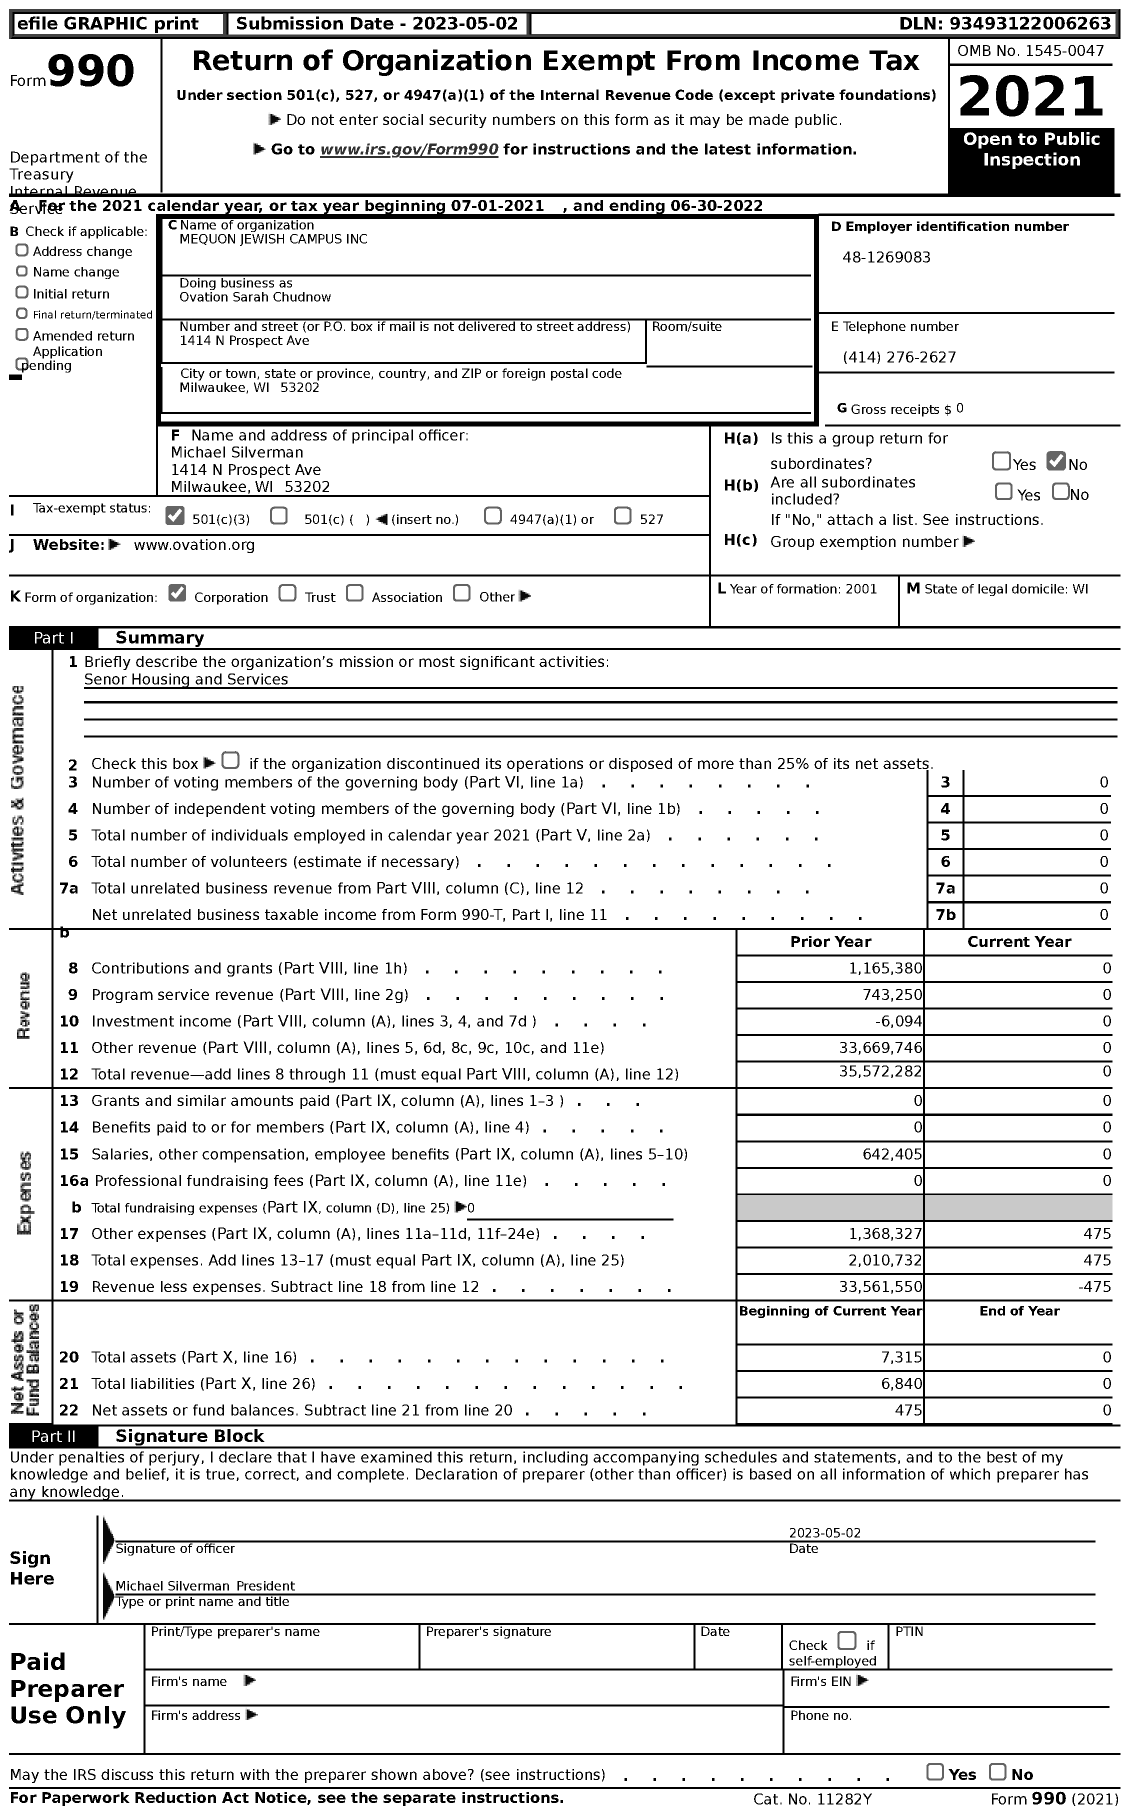 Image of first page of 2021 Form 990 for Ovation Sarah Chudnow